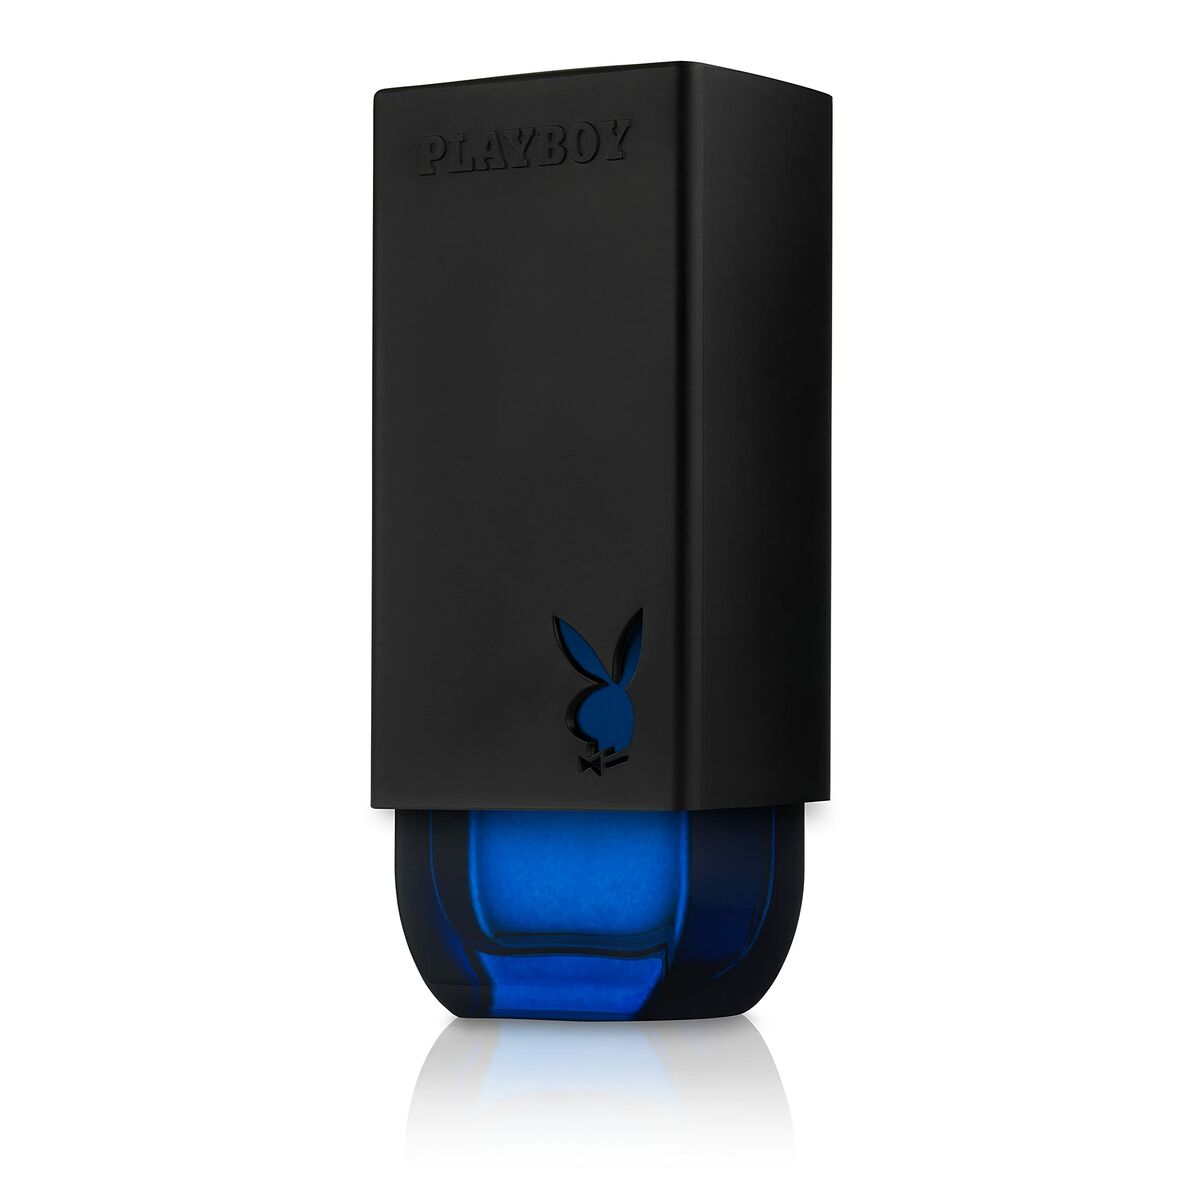 Perfume Hombre Playboy EDT 50 ml Make The Cover